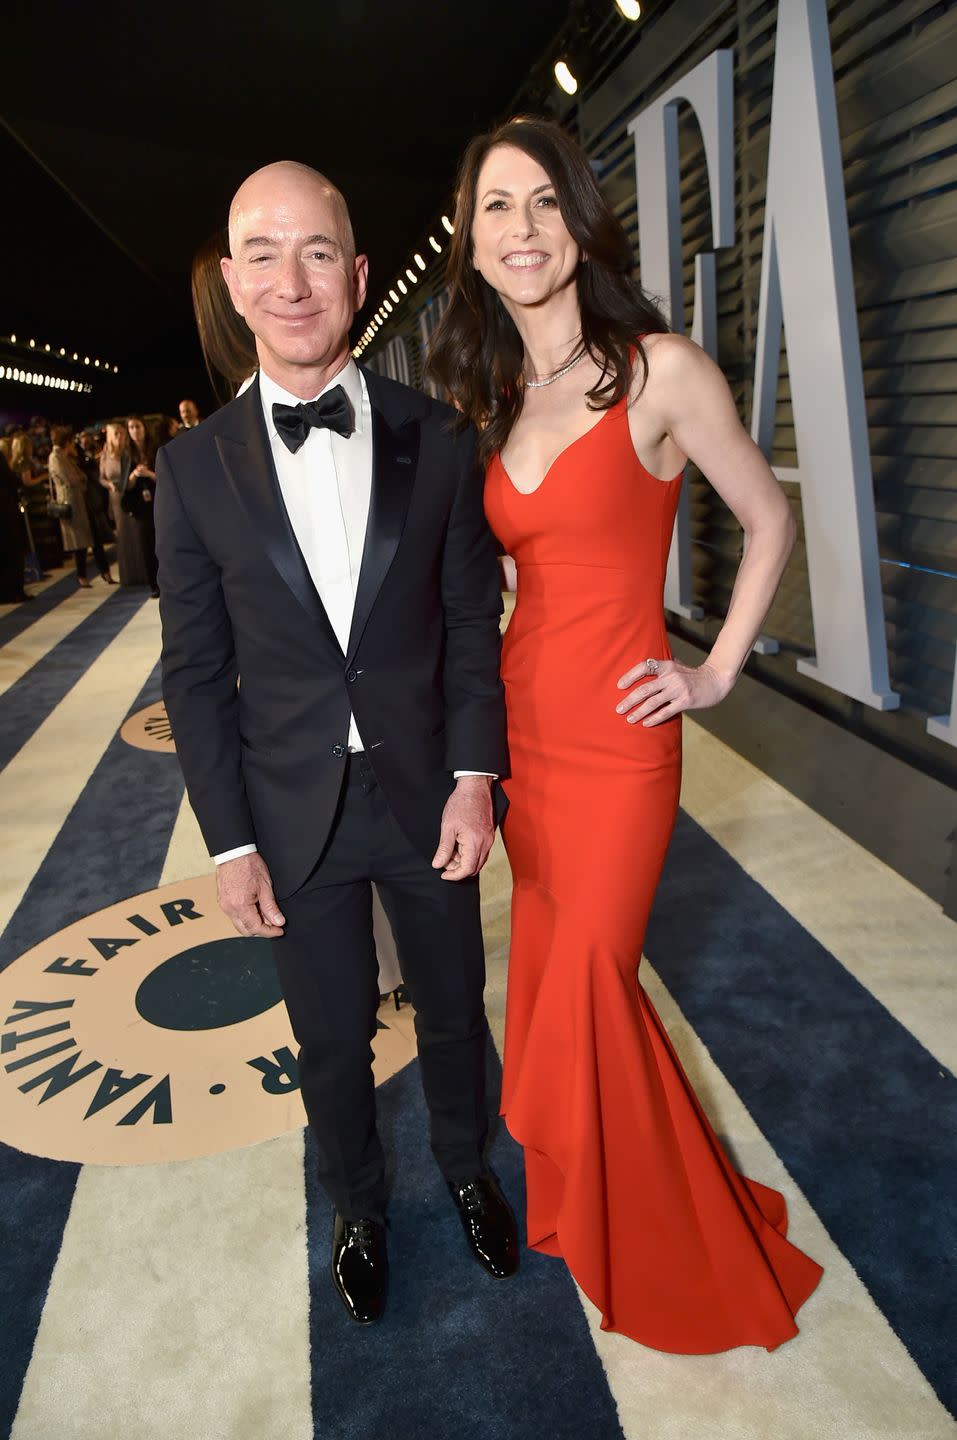 <p>Married for more than 25 years, the couple split in 2019 over <a href="https://www.townandcountrymag.com/society/money-and-power/a26251113/jeff-bezos-lauren-sanchez-relationship-timeline/" rel="nofollow noopener" target="_blank" data-ylk="slk:rumors of his infidelity" class="link rapid-noclick-resp">rumors of his infidelity</a>. Mackenzie received $38 billion (yes, billion!) in the split but has since become a prolific philanthropist, <a href="https://www.independent.co.uk/news/world/americas/jeff-bezos-mackenzie-scott-amazon-b1866409.html" rel="nofollow noopener" target="_blank" data-ylk="slk:donating billions" class="link rapid-noclick-resp">donating billions</a> (again, yes, billions!) to various charities since the divorce. </p>